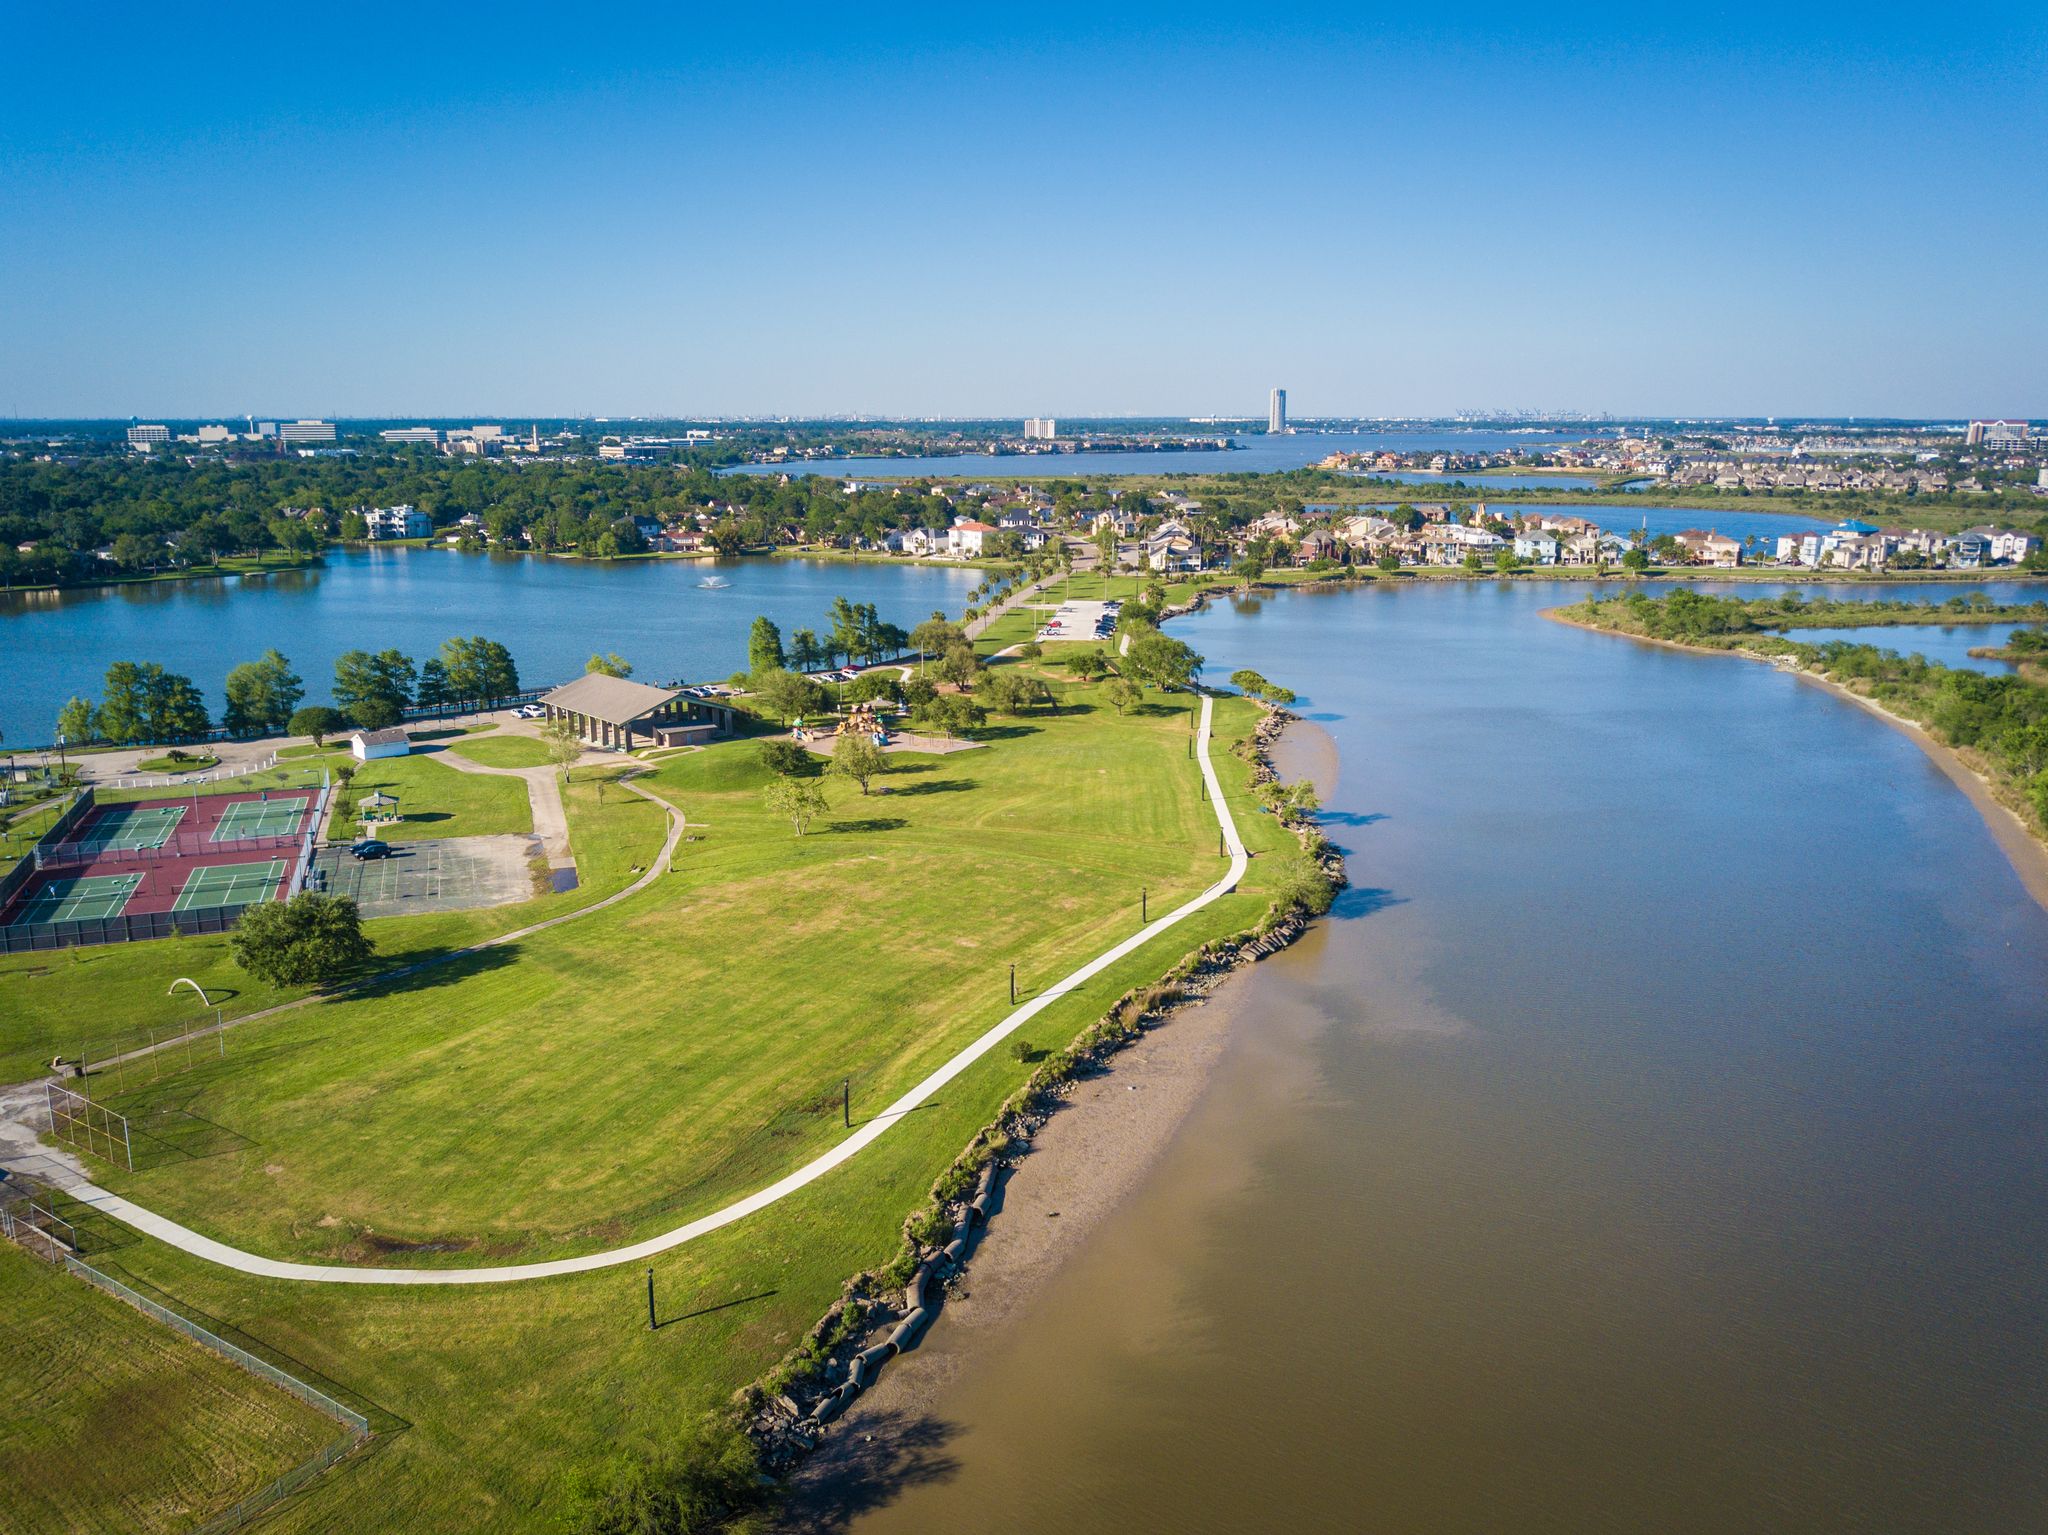 Ariel view of David Braun Park in the Houston Bay Area